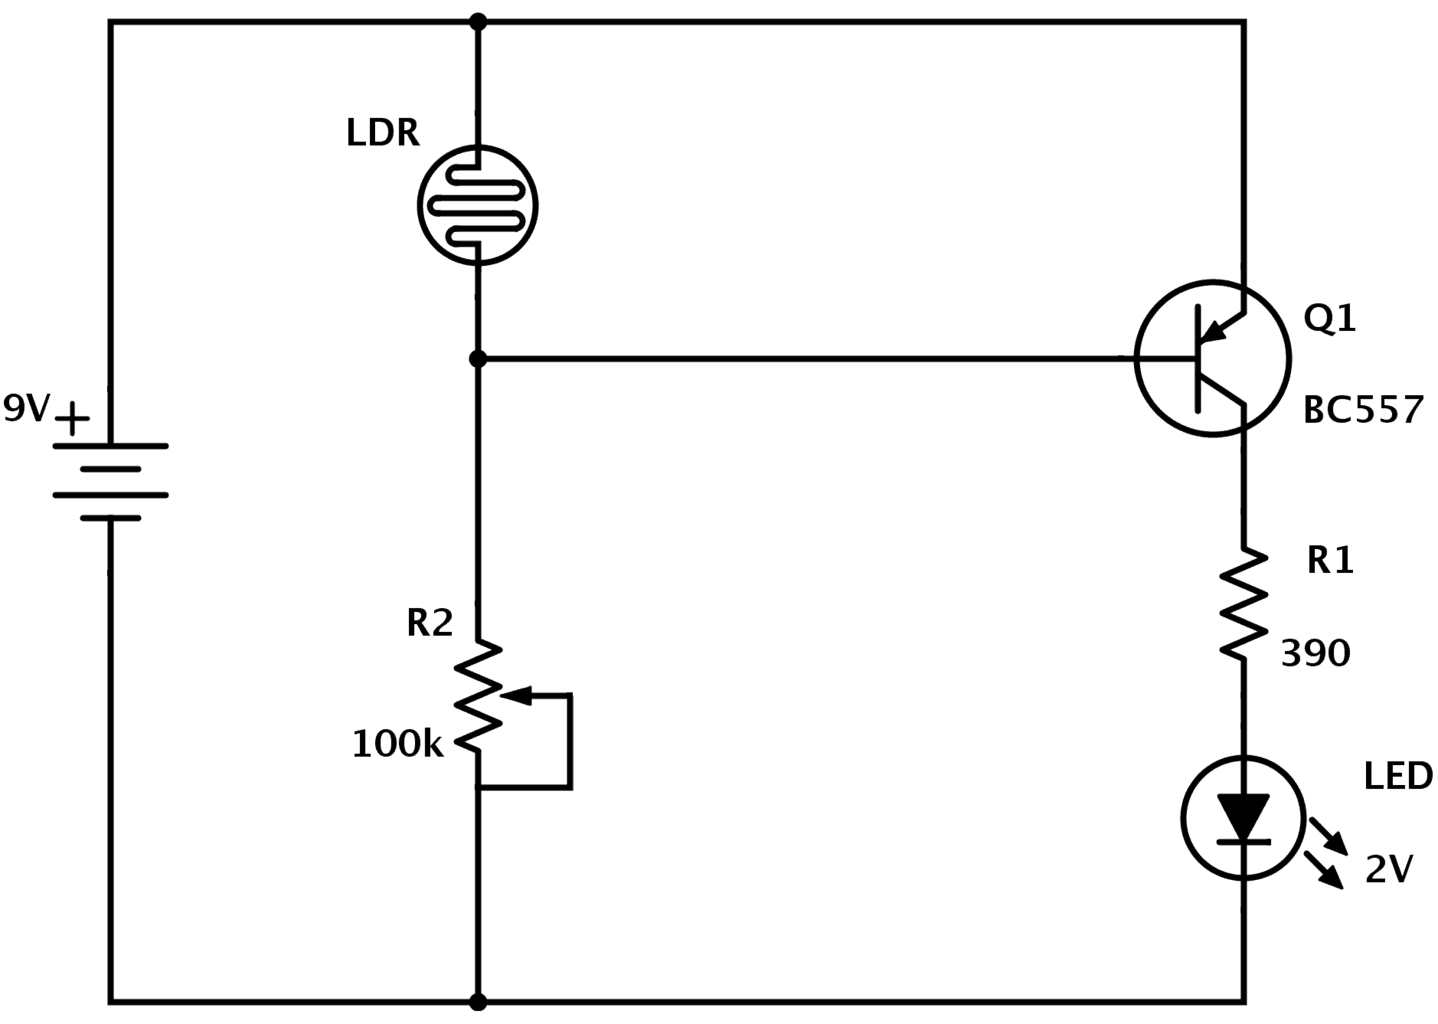 Circuit Diagram Maker Proximity Switch Circuit In Addition Simple Ohmmeter Circuit Diagram